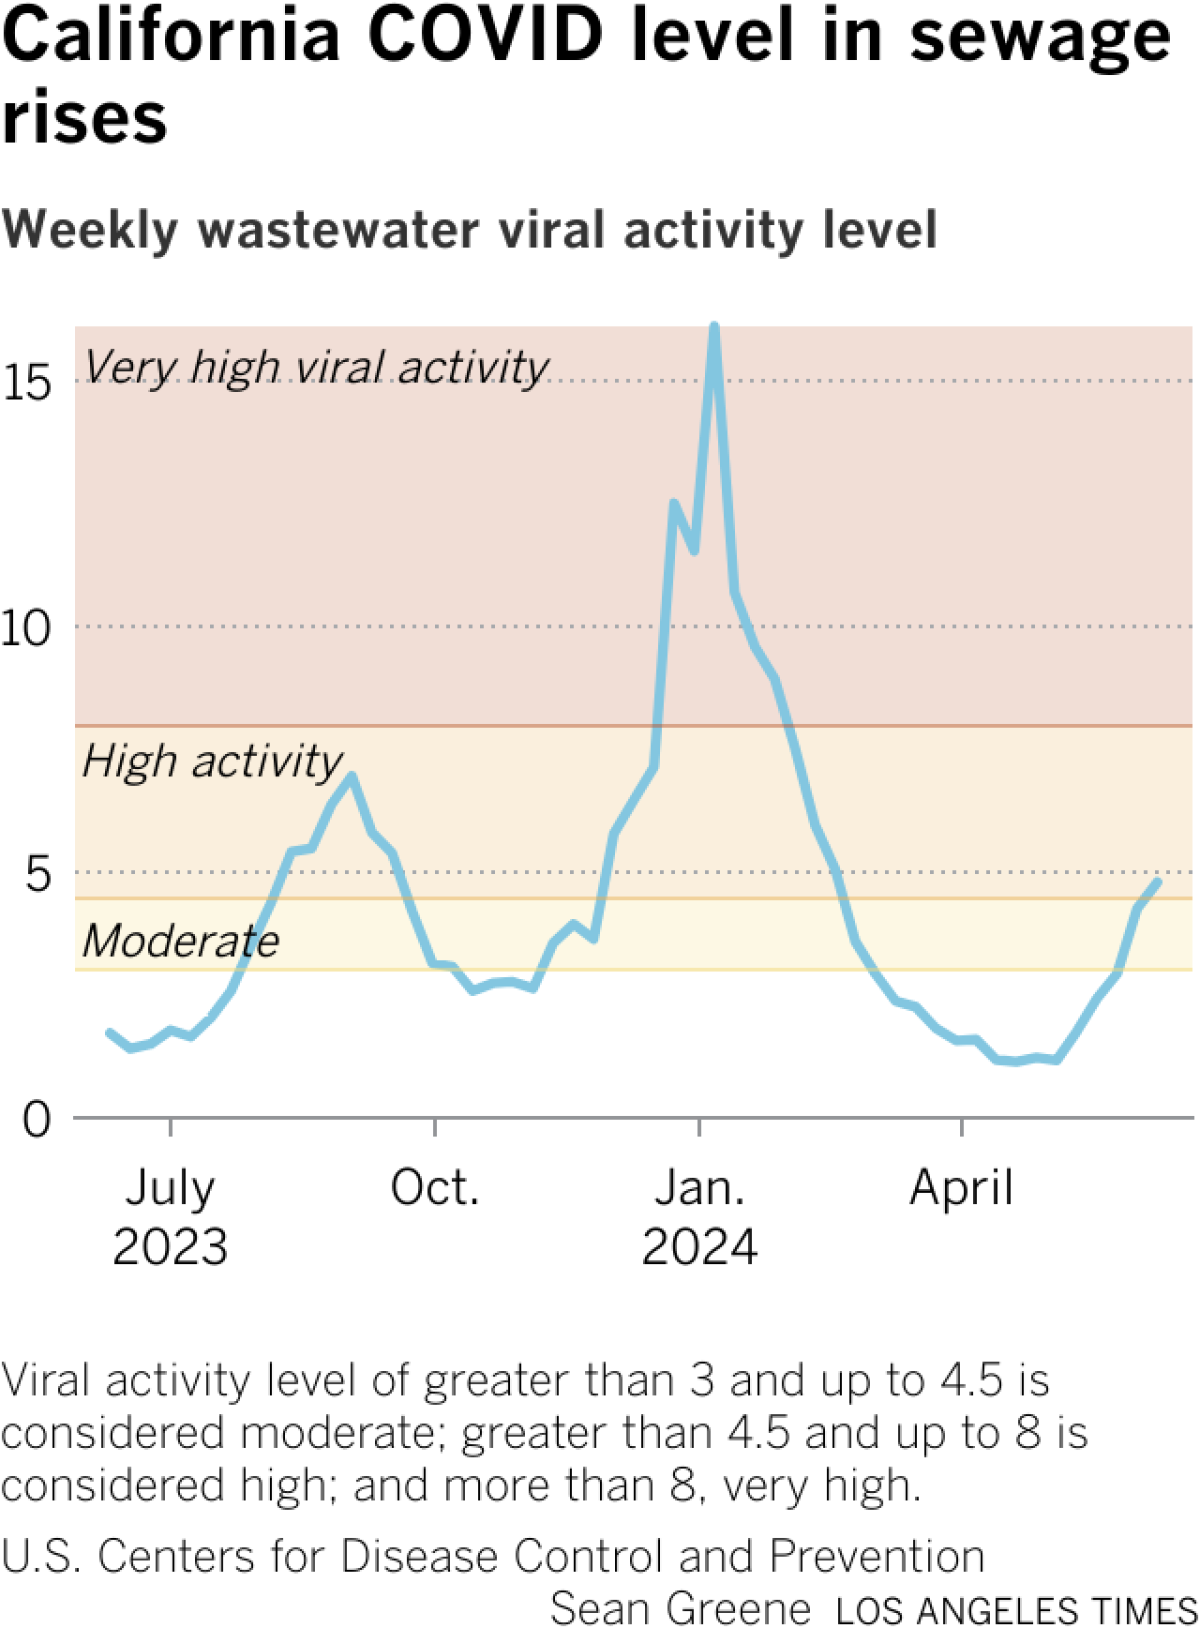 The line chart shows that viral activity in wastewater has been increasing again since May. The last significant increase was in January.